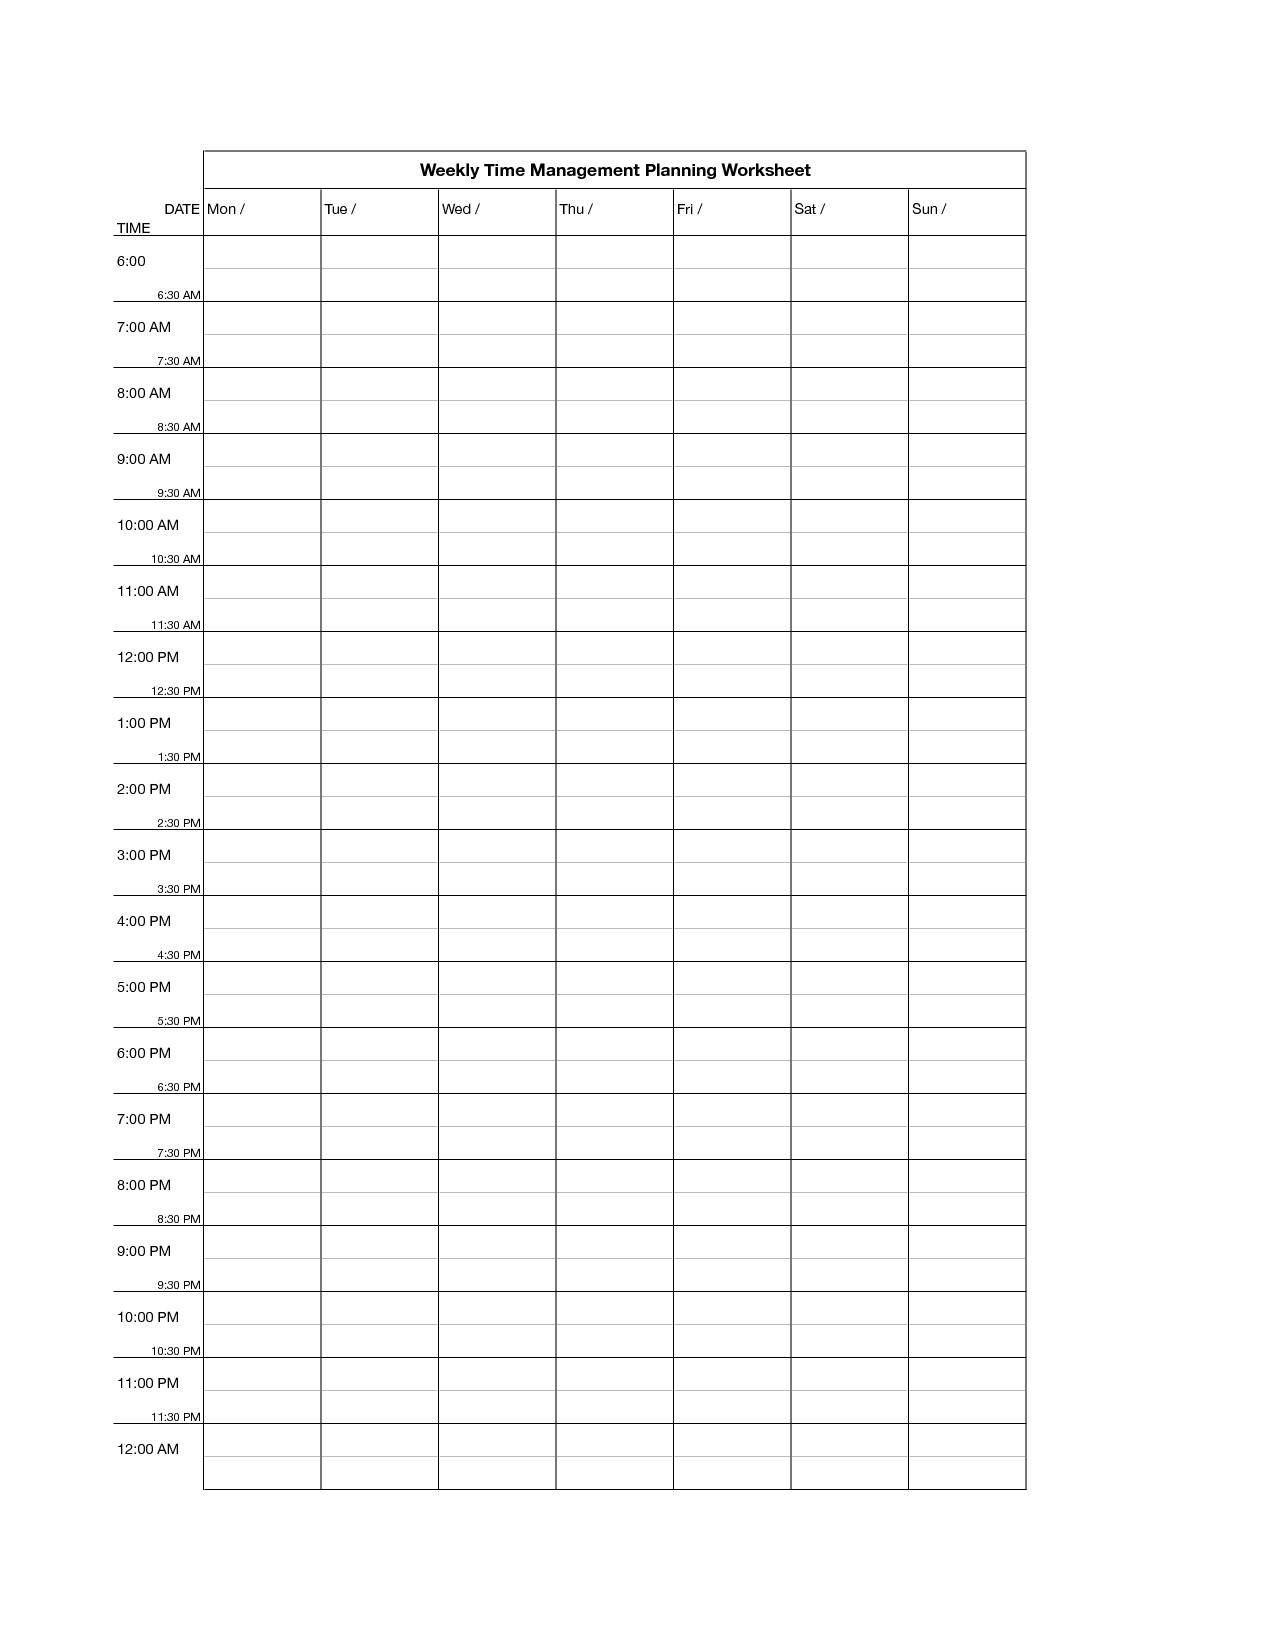 printable-weekly-time-management-template-free-printable-templates